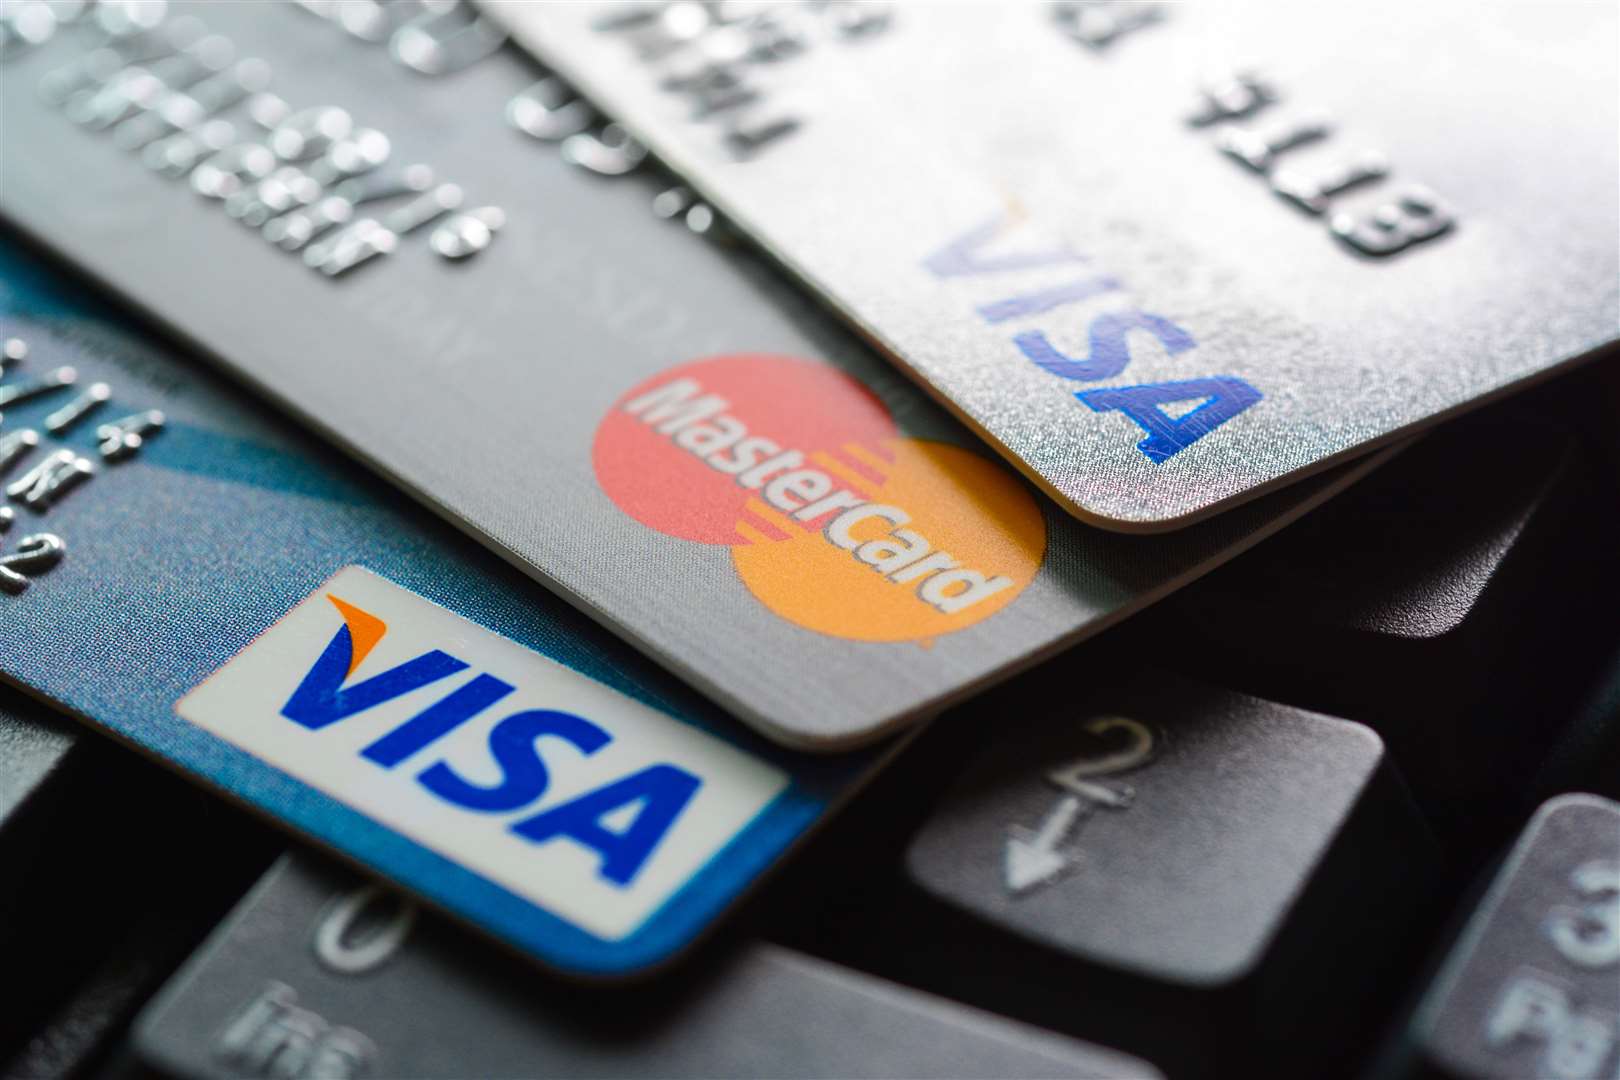 Be suspicious and keep your credit card details confidential